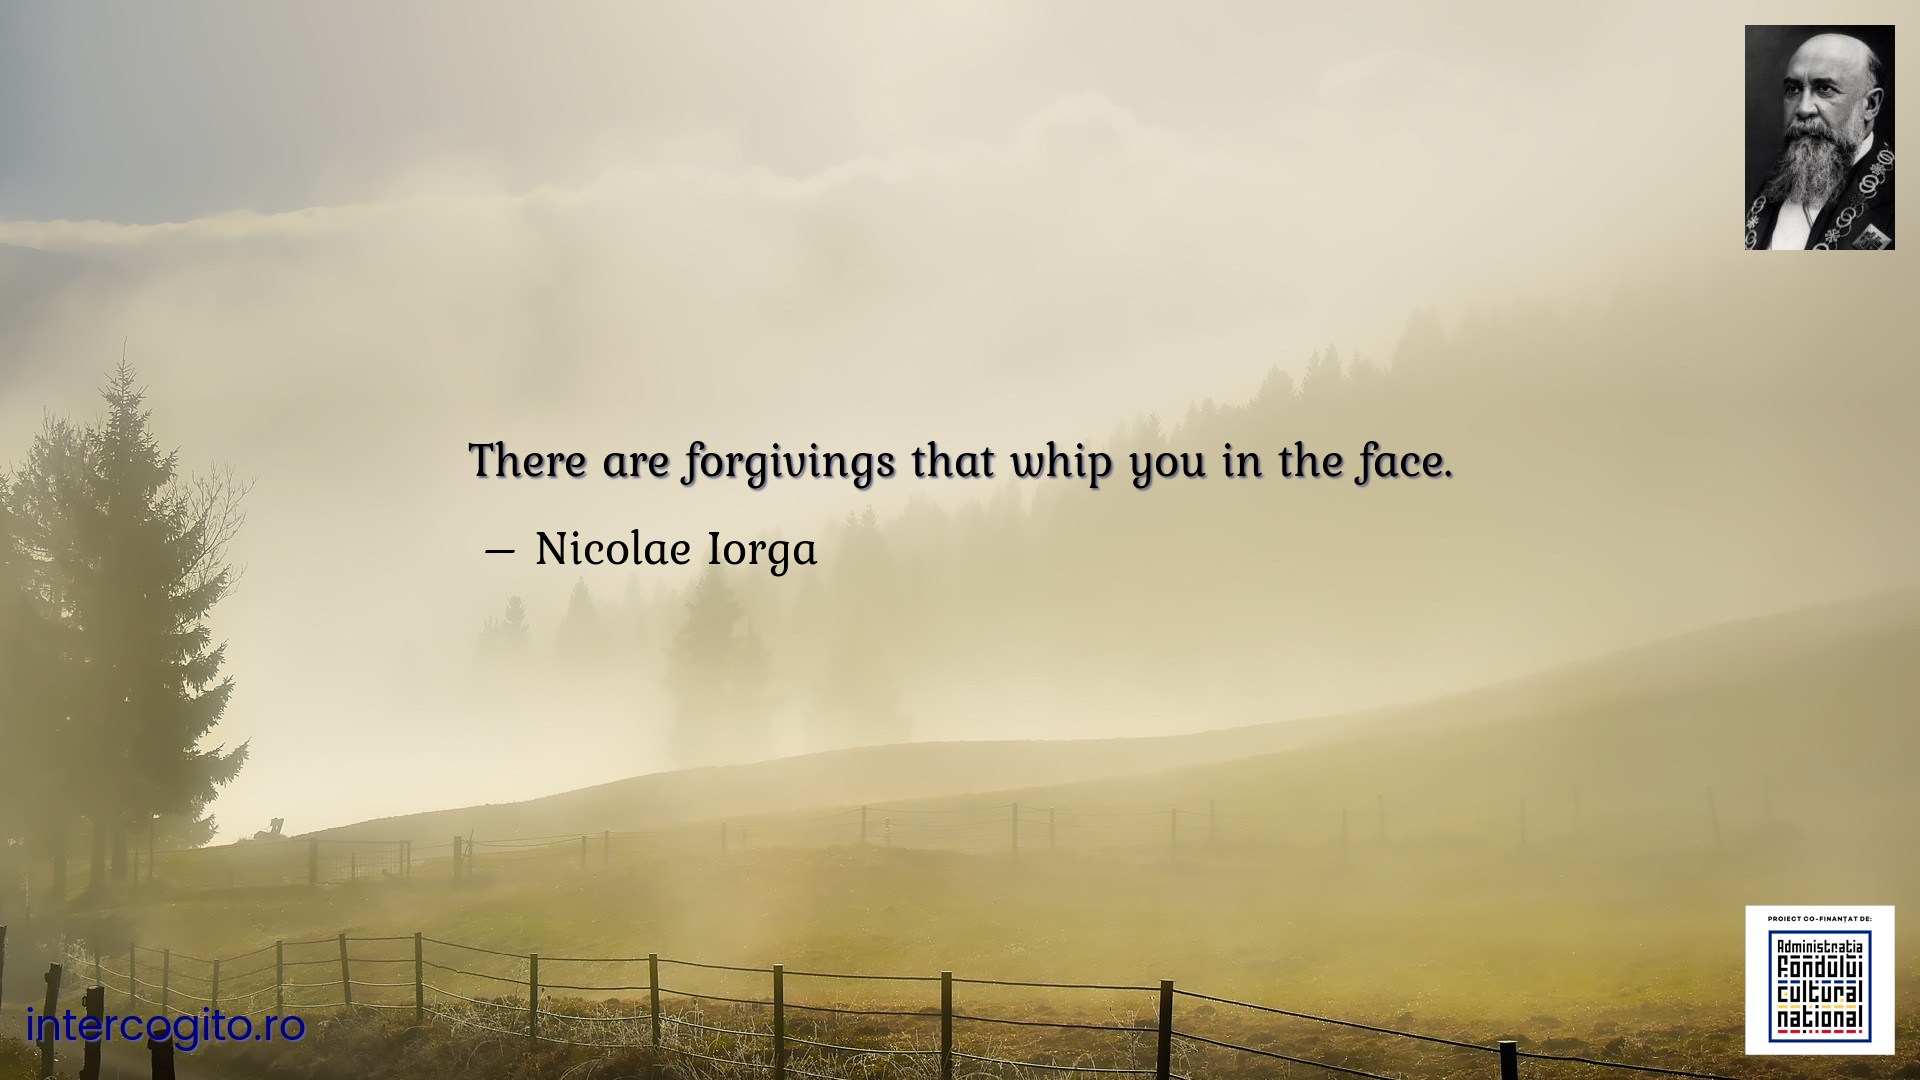 There are forgivings that whip you in the face.